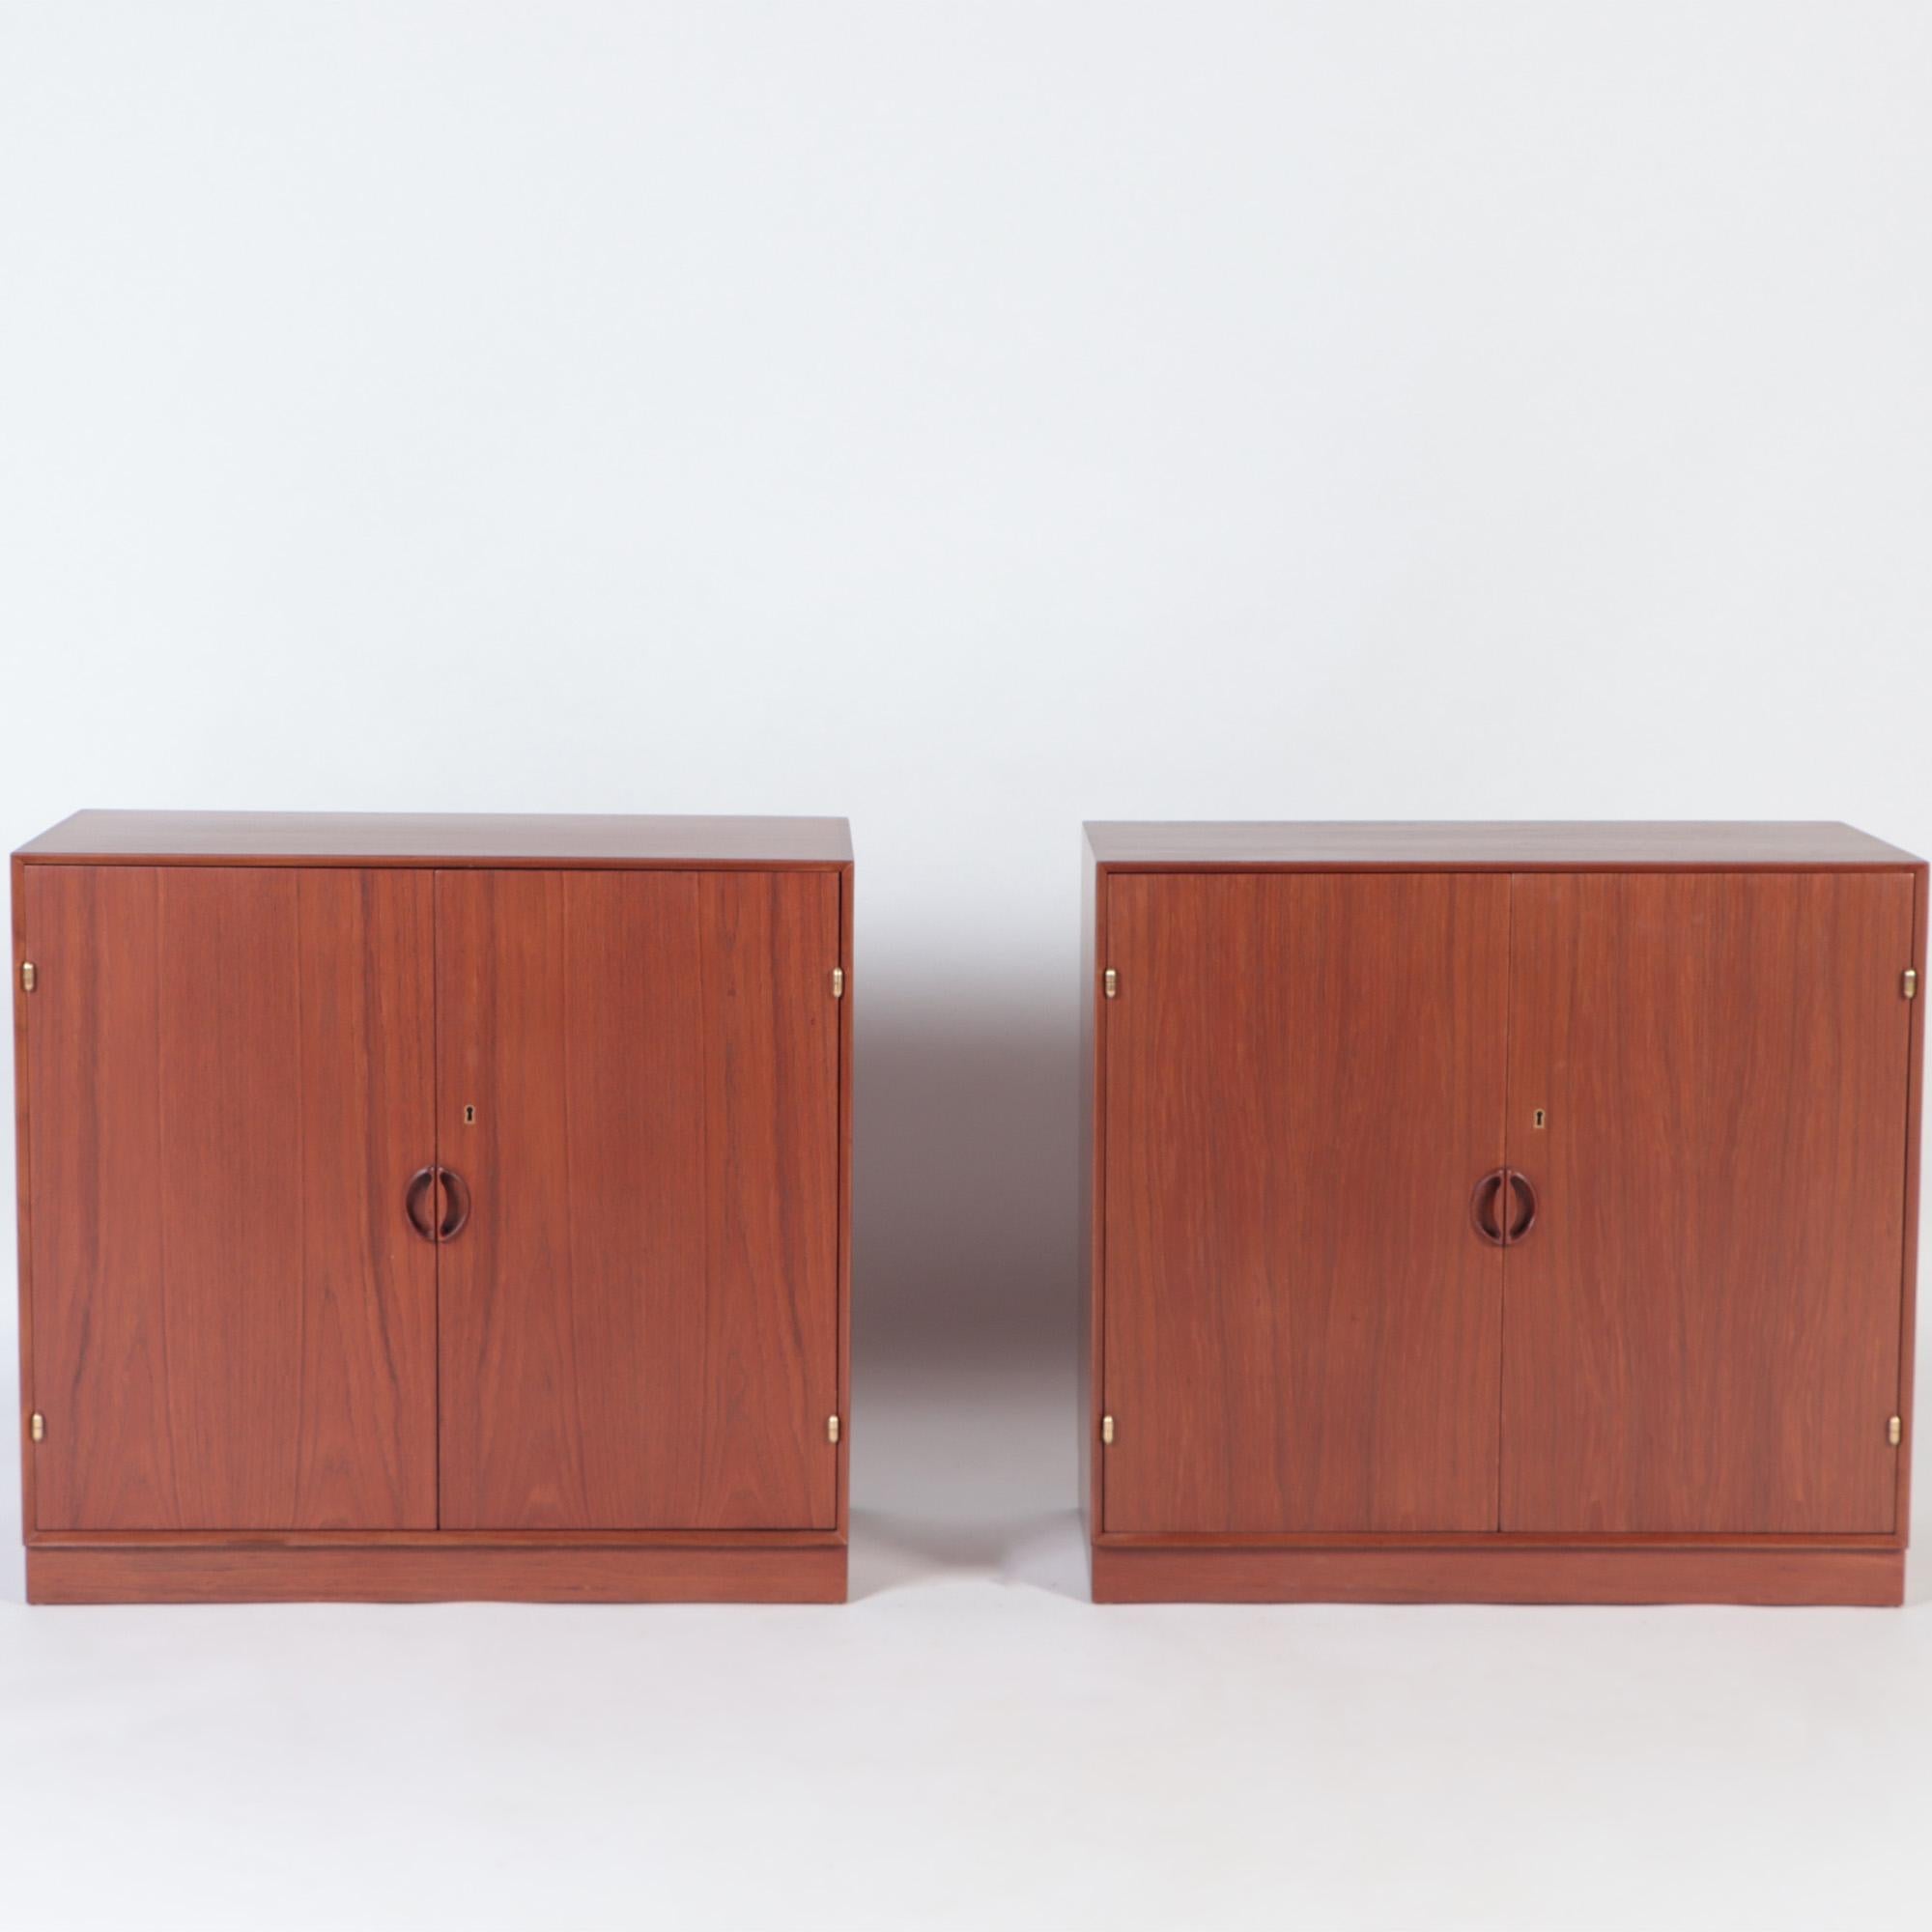 A pair of mid-century two door Cabinets by John Stuart. Made in Denmark.
Stamped in the back. 1950's.